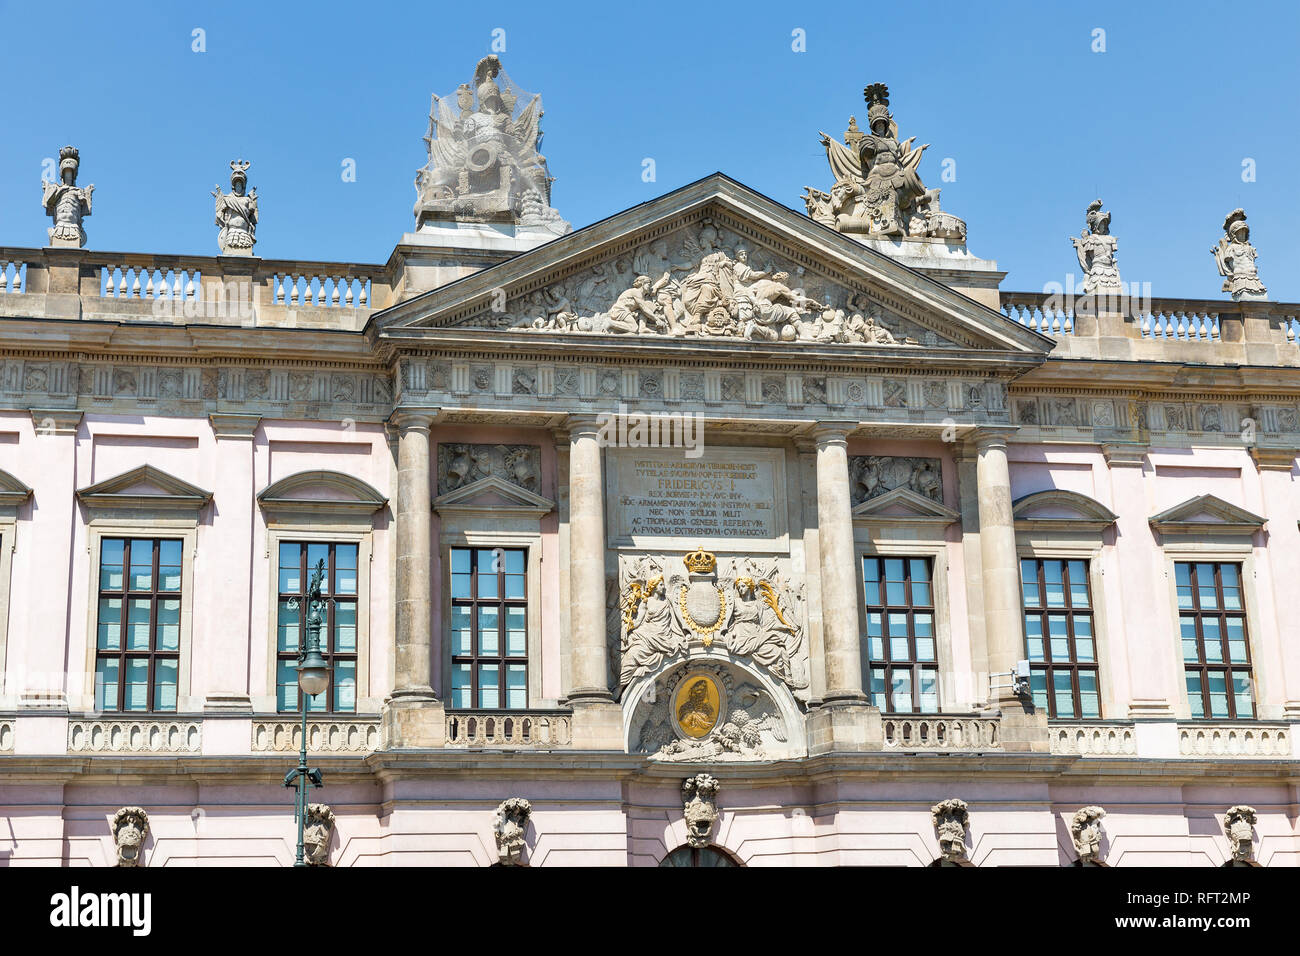 Zeughaus or Old Arsenal roof sculpture. Now it is German Historical Museum in Berlin, Germany. Stock Photo